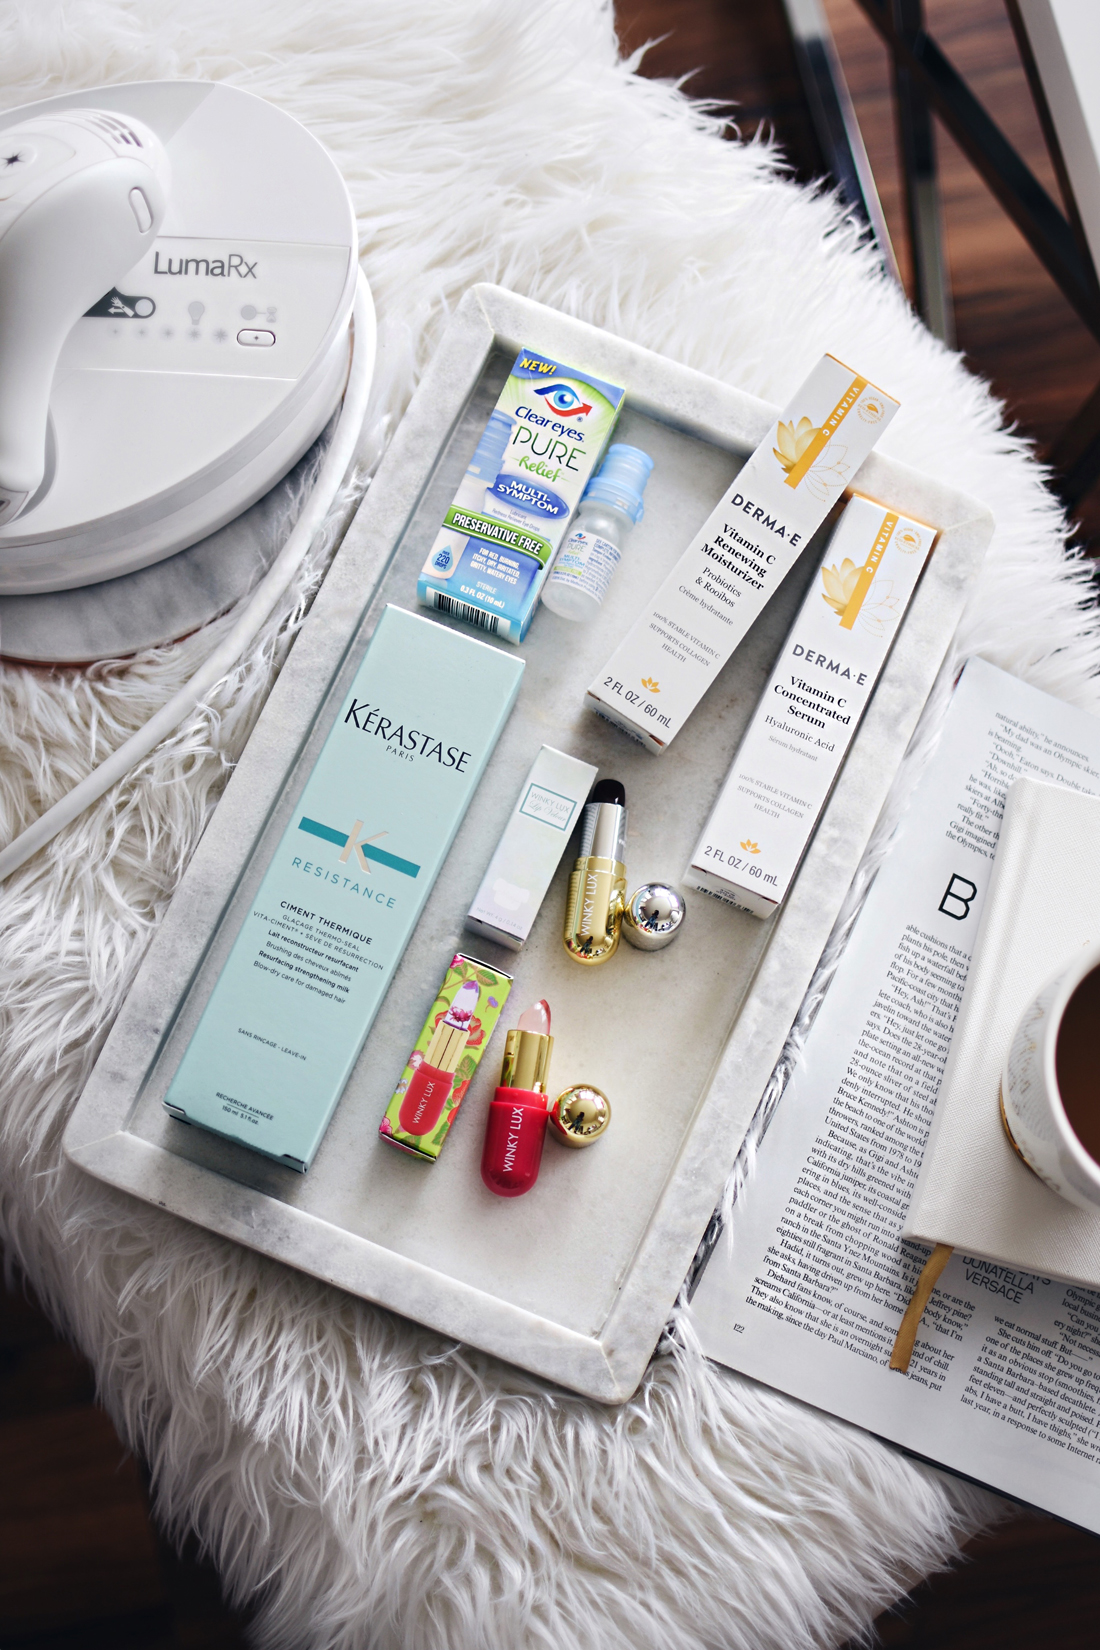 Start Studded style secrets Babbleboxx- Kerastase ciment thermique, Winky Lux flower balm and stella marina lipstick, clear eyes pure relief and LumaRX full body device